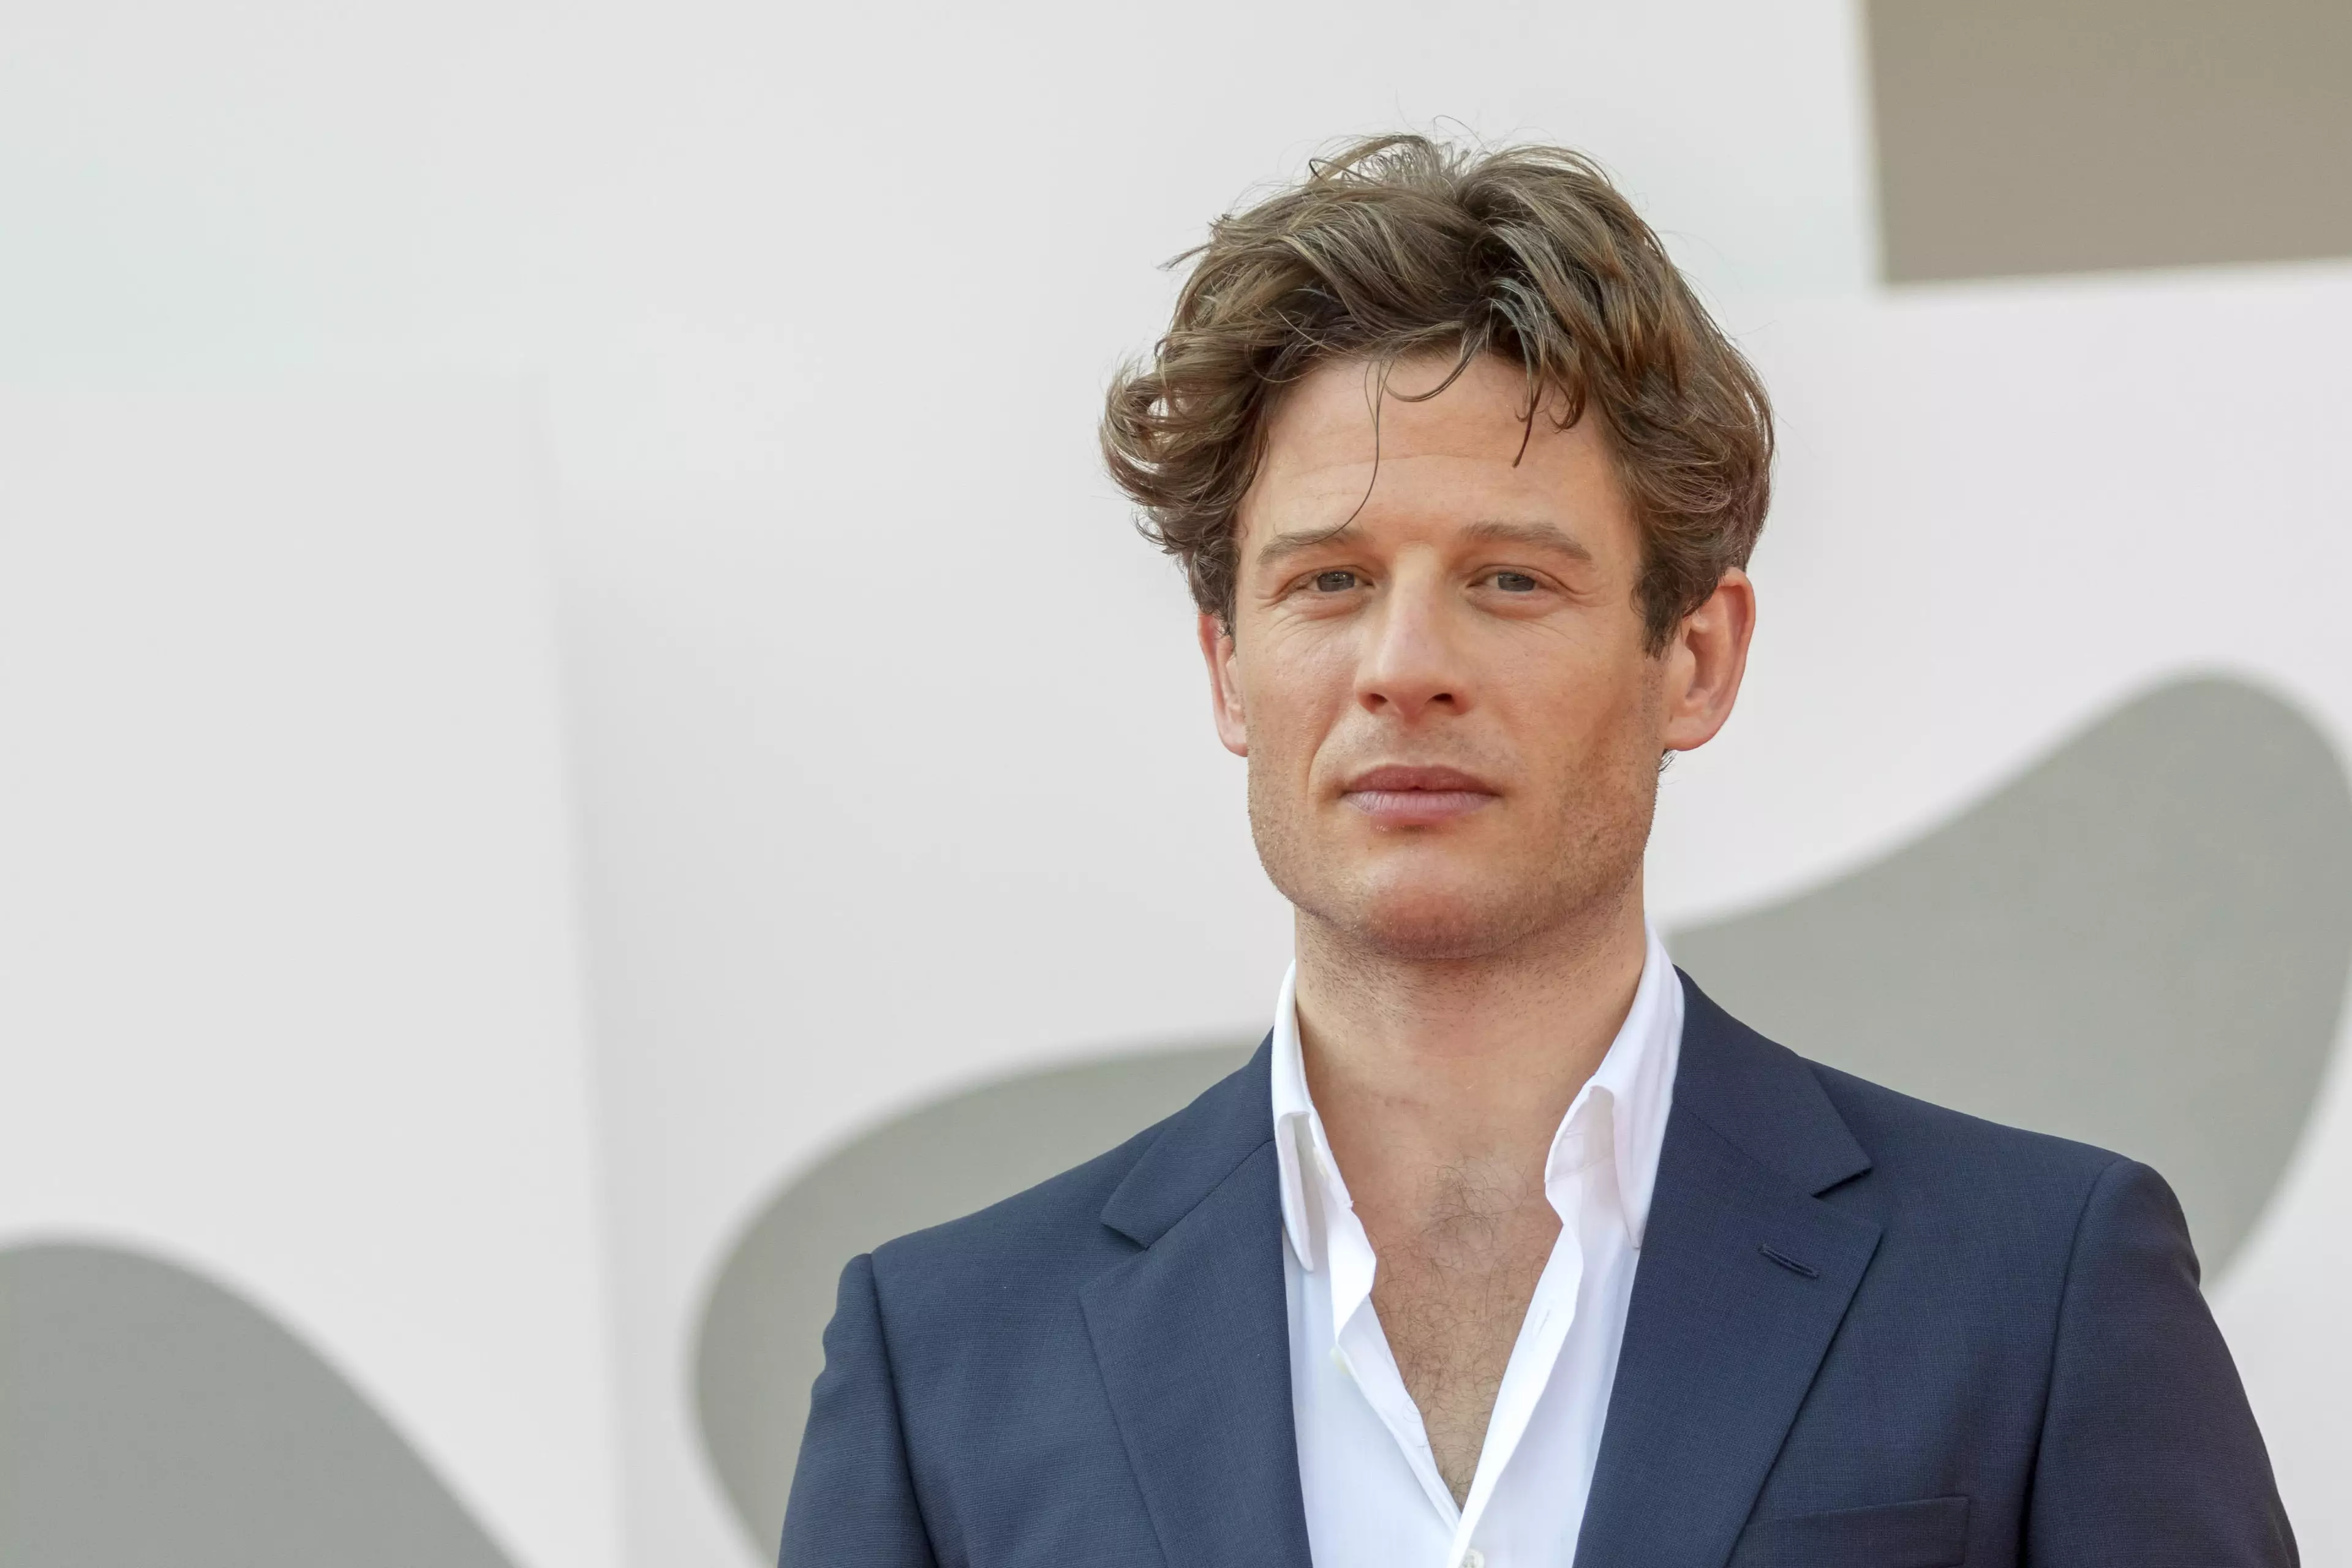 James Norton is keen to show diabetic children that even they could be James Bond. (